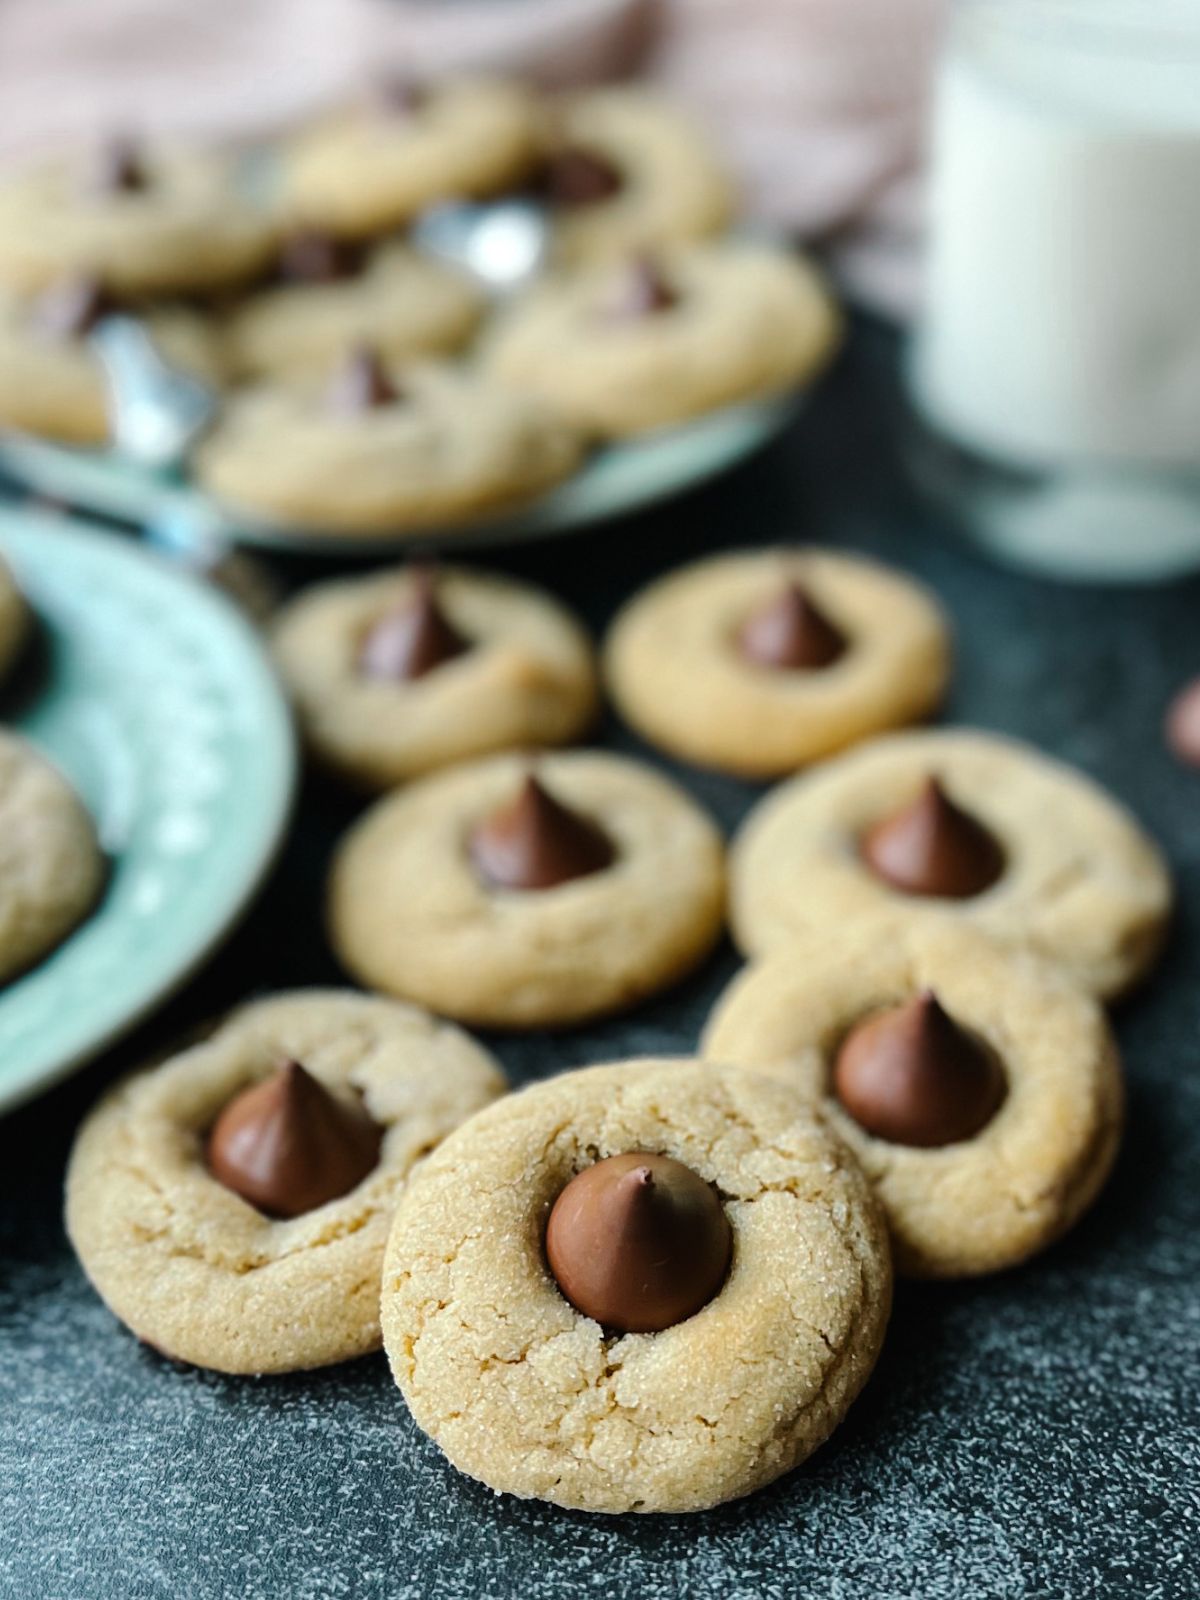 Peanut butter blossoms on a counter with a plate of more cookies and a glass of milk in the background.